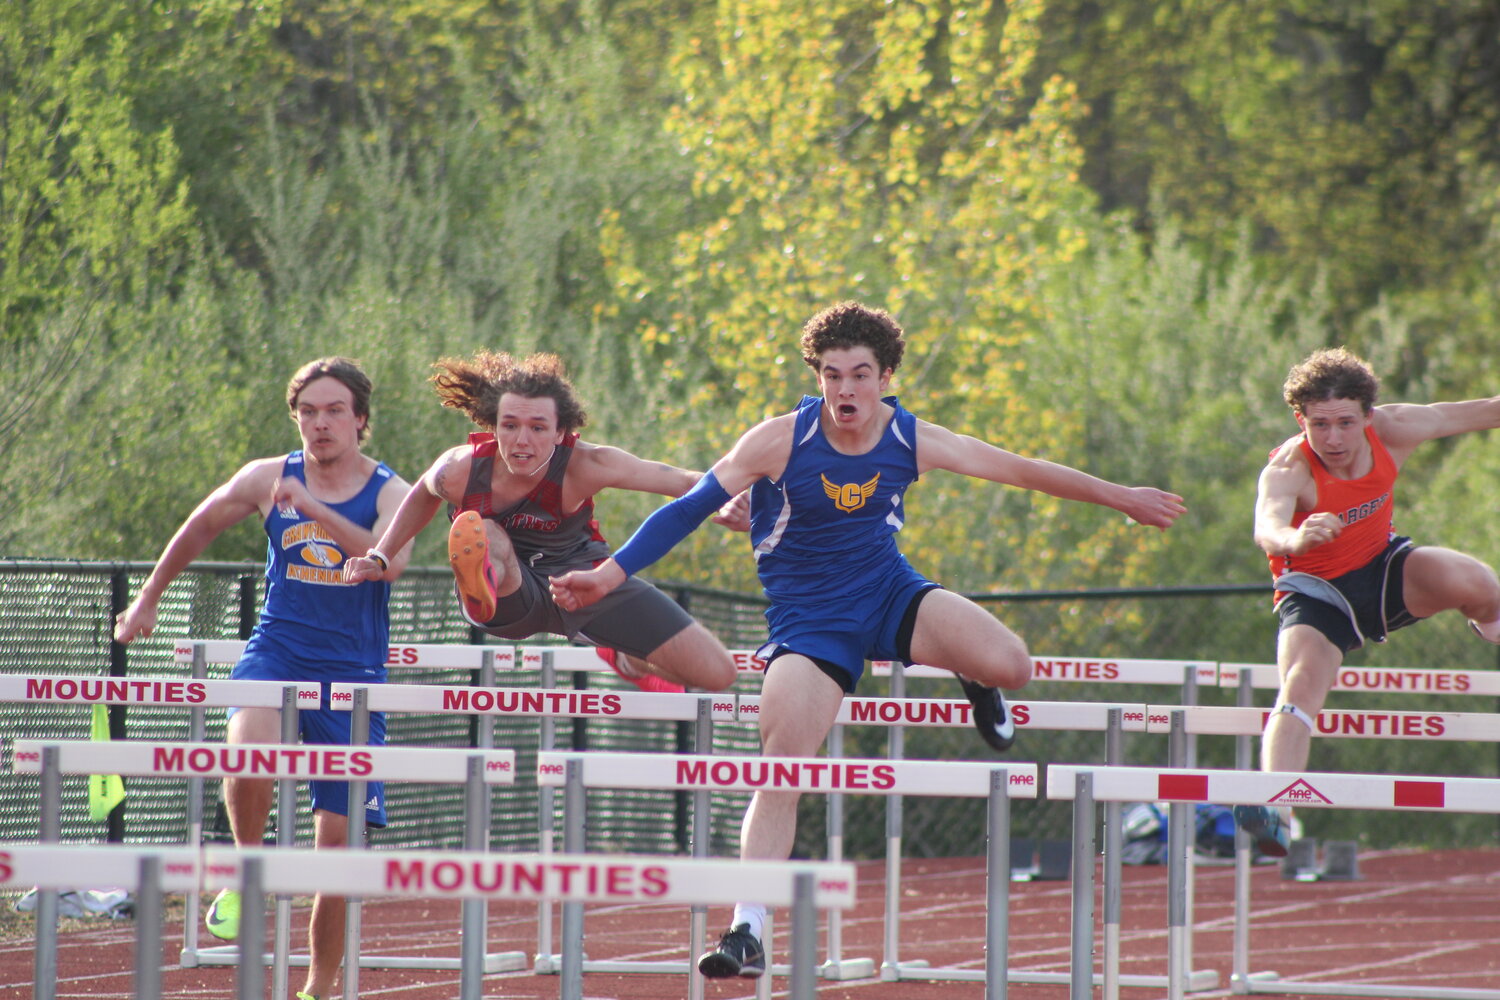 Sophomore Alec Saidian earned 3 county titles for CHS in both the 110 and 300 meter hurdles and the discus throw.